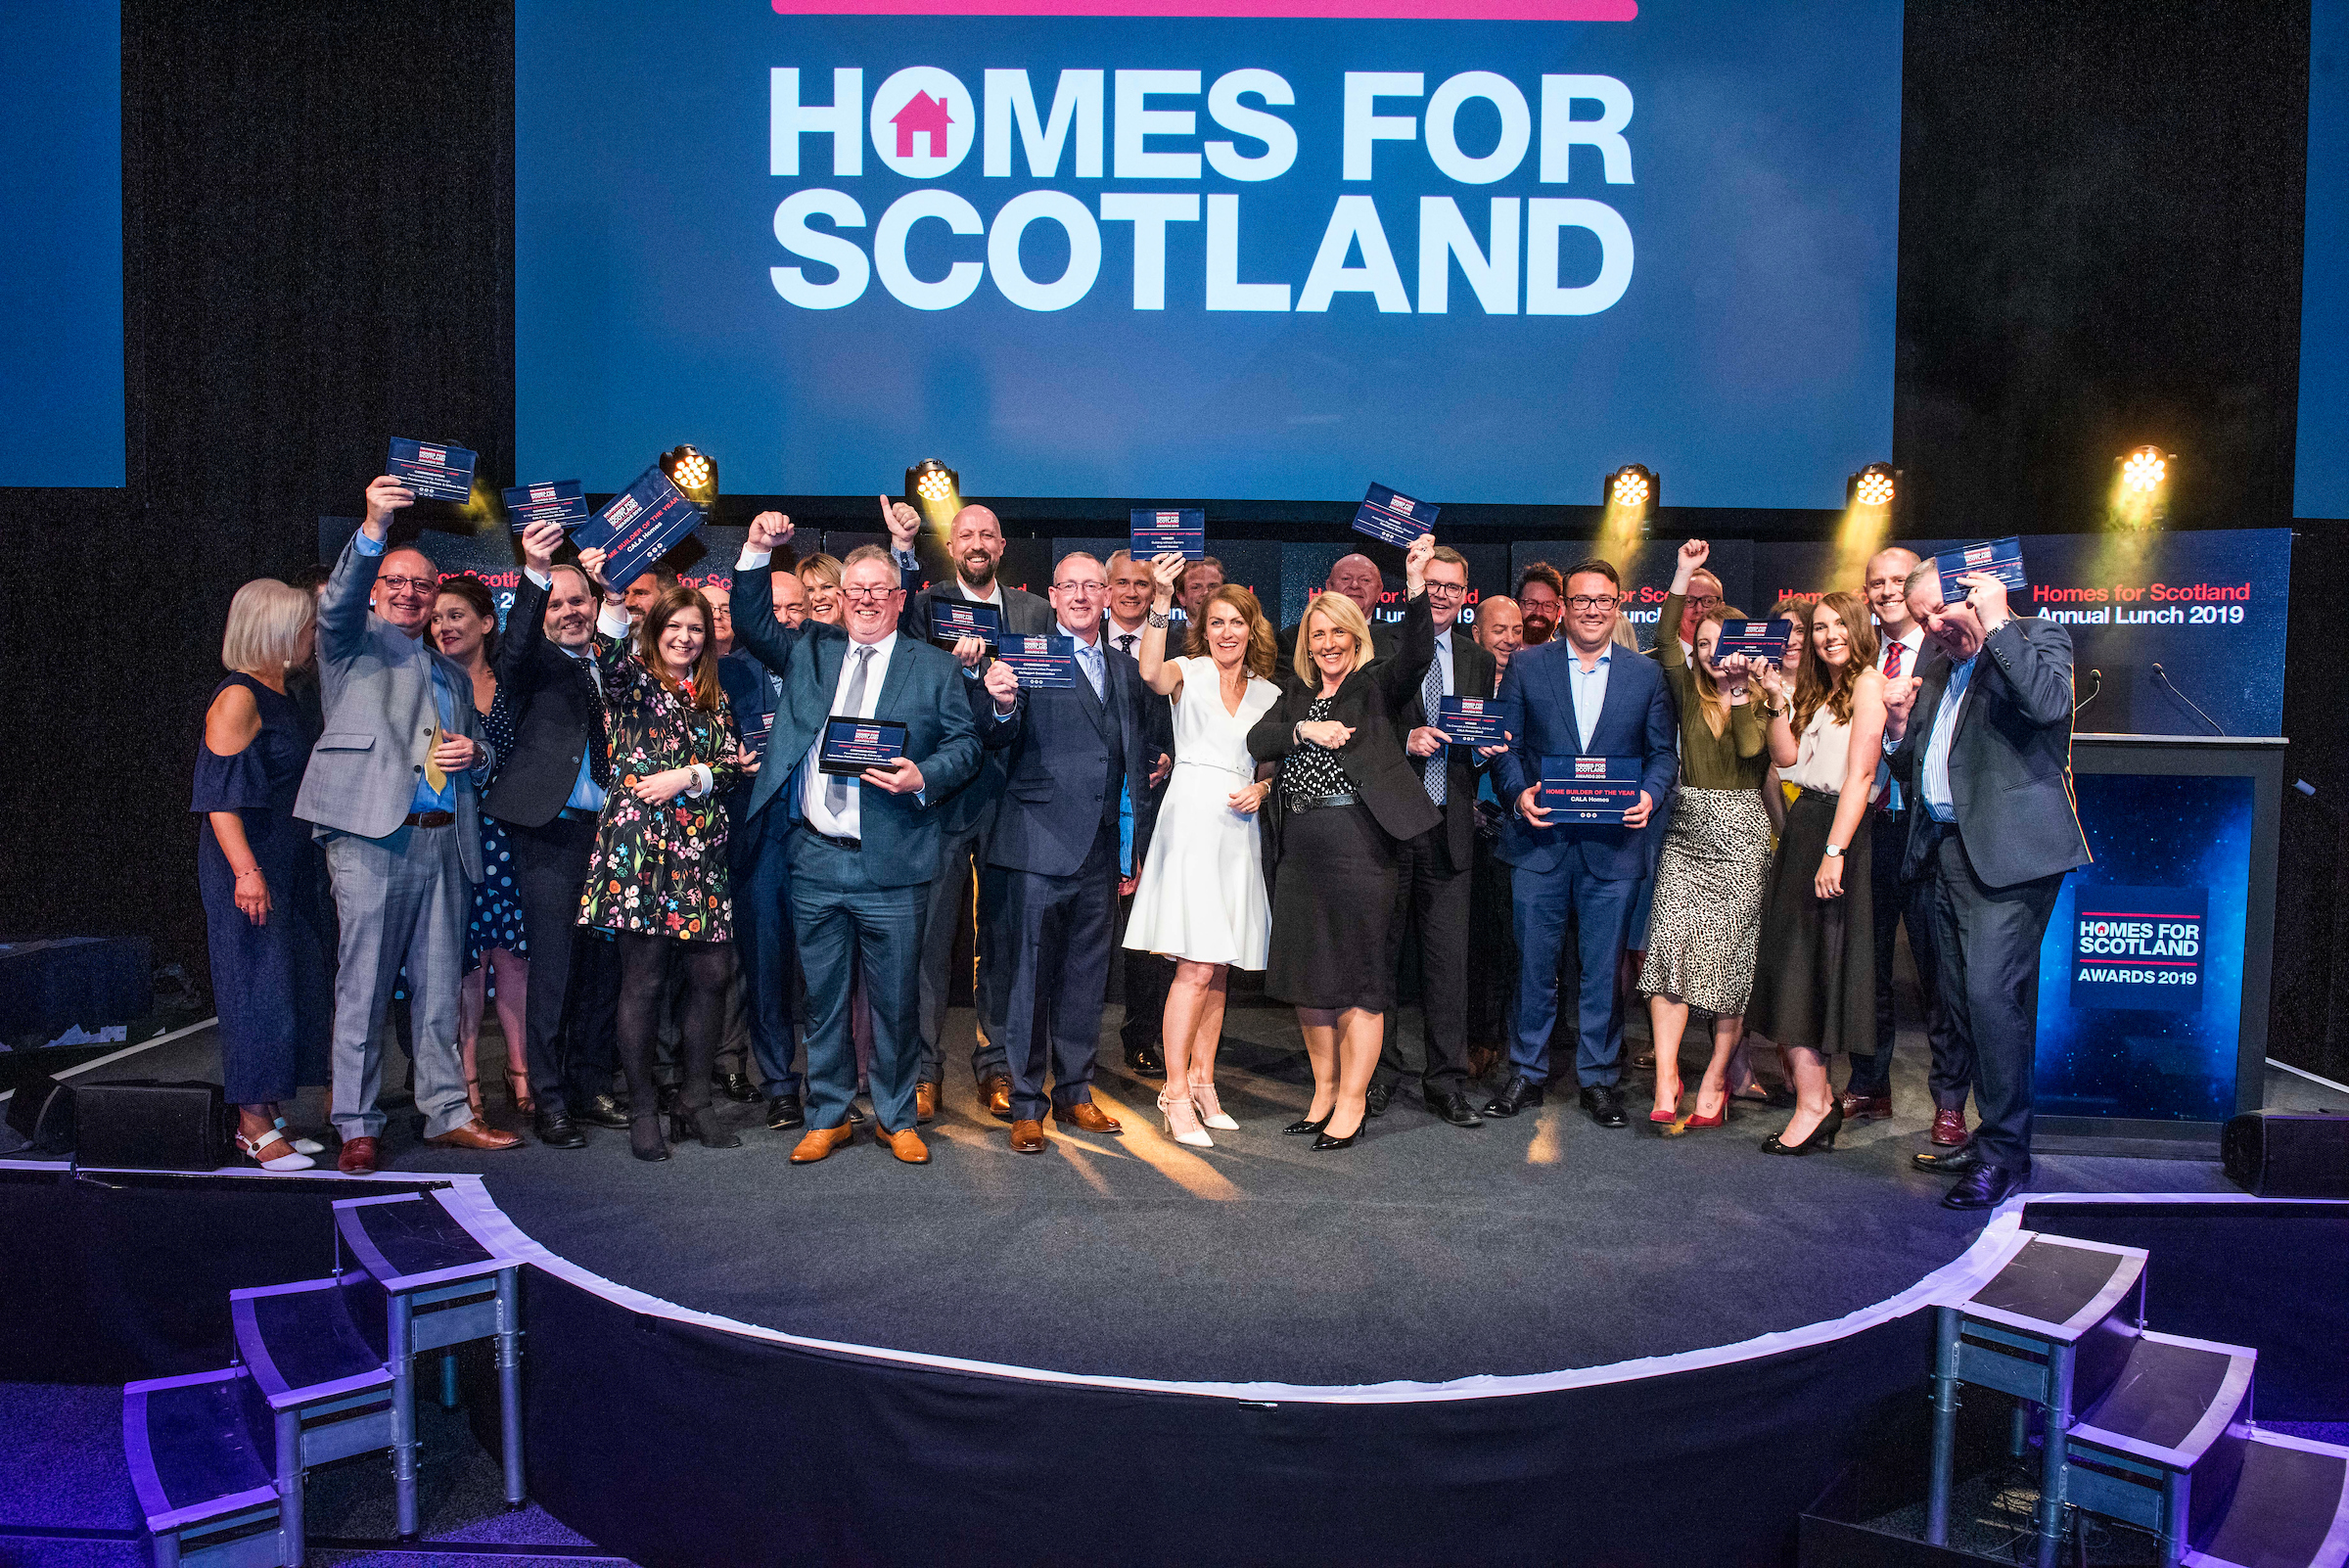 CALA crowned Home Builder of the Year at Homes for Scotland awards